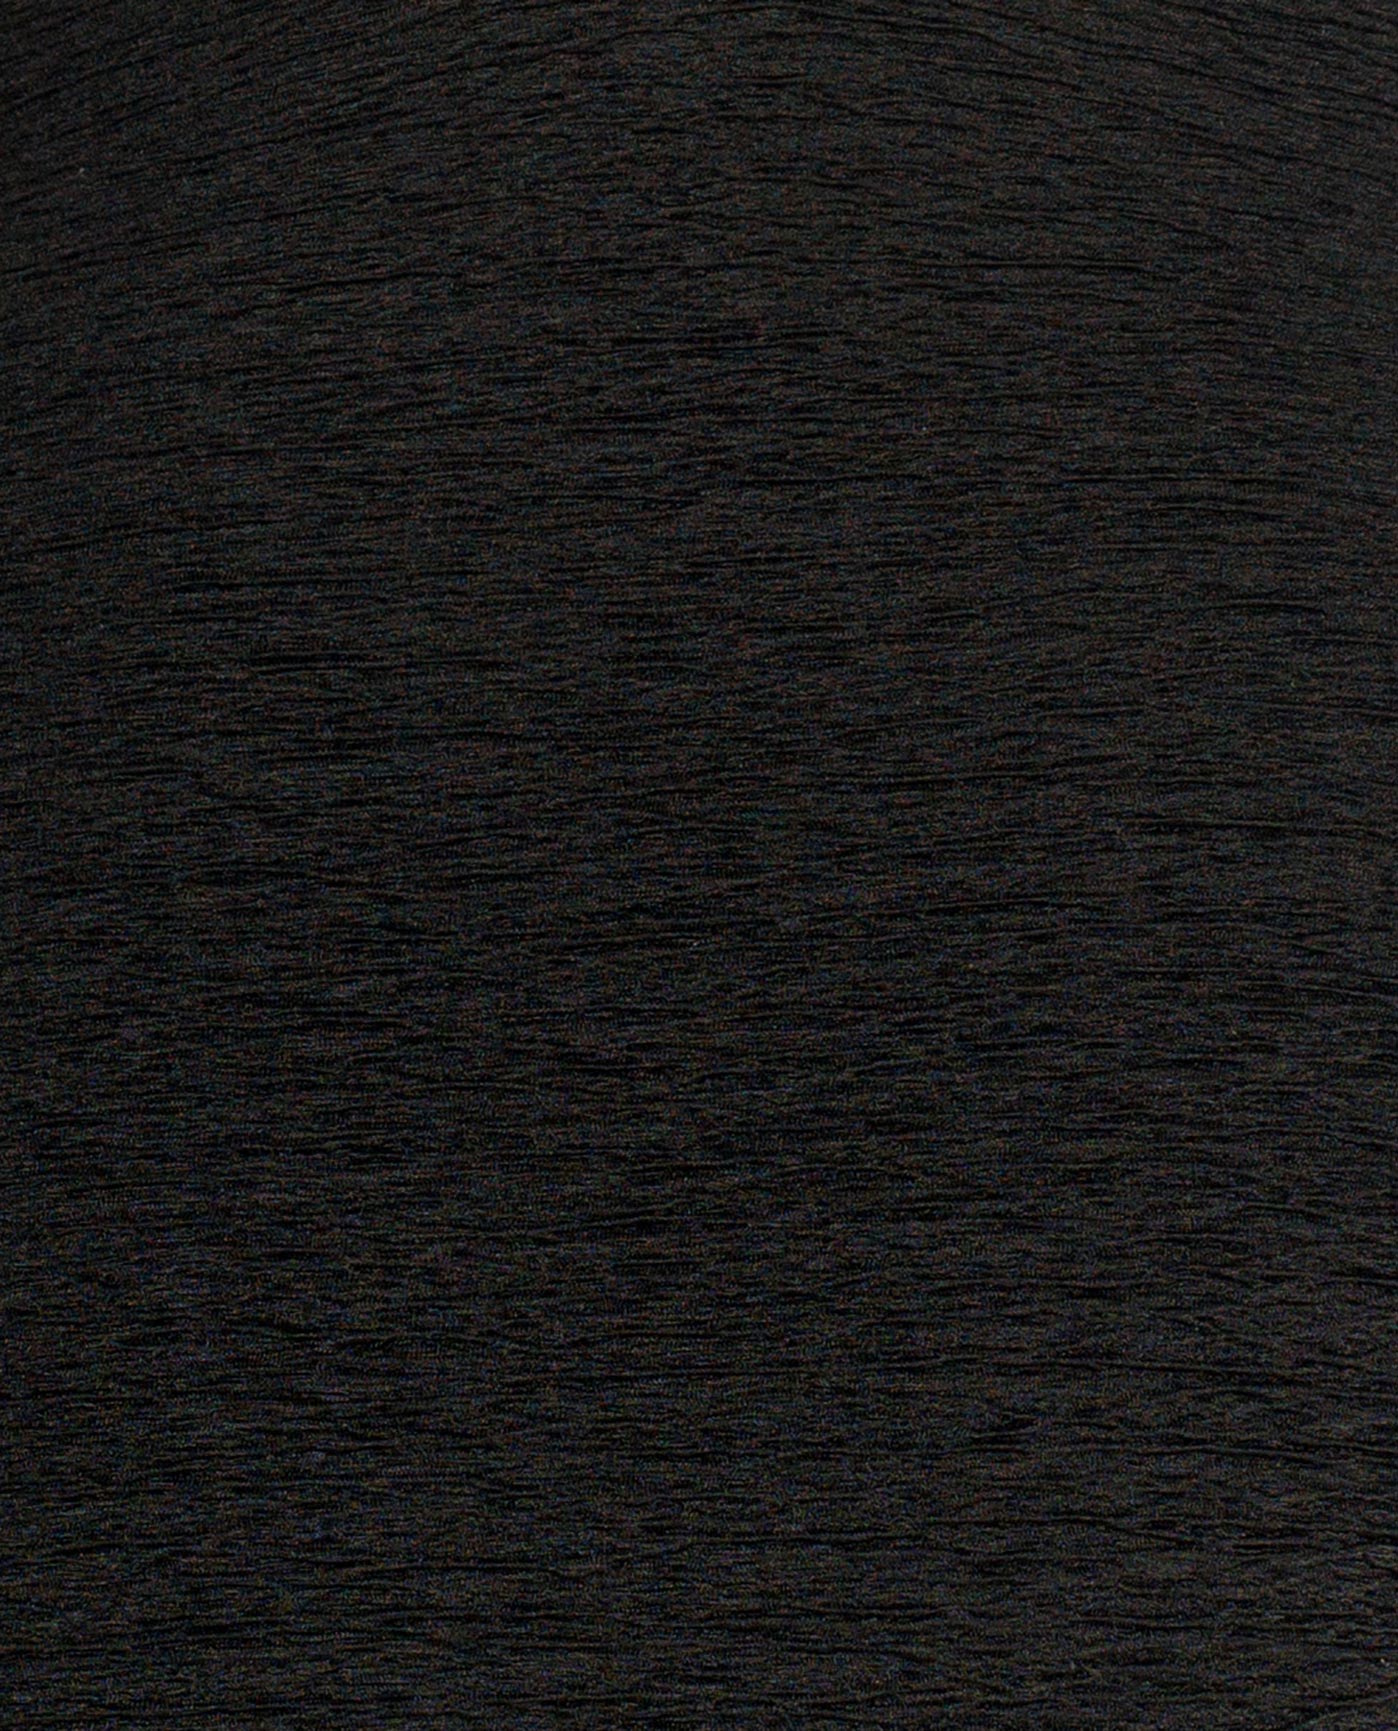 FABRIC SWATCH VIEW OF CHLORINE RESISTANT KRINKLE TEXTURED SOLID TWIST FRONT PLUS SIZE ONE PIECE | KRINKLE BLACK 2023